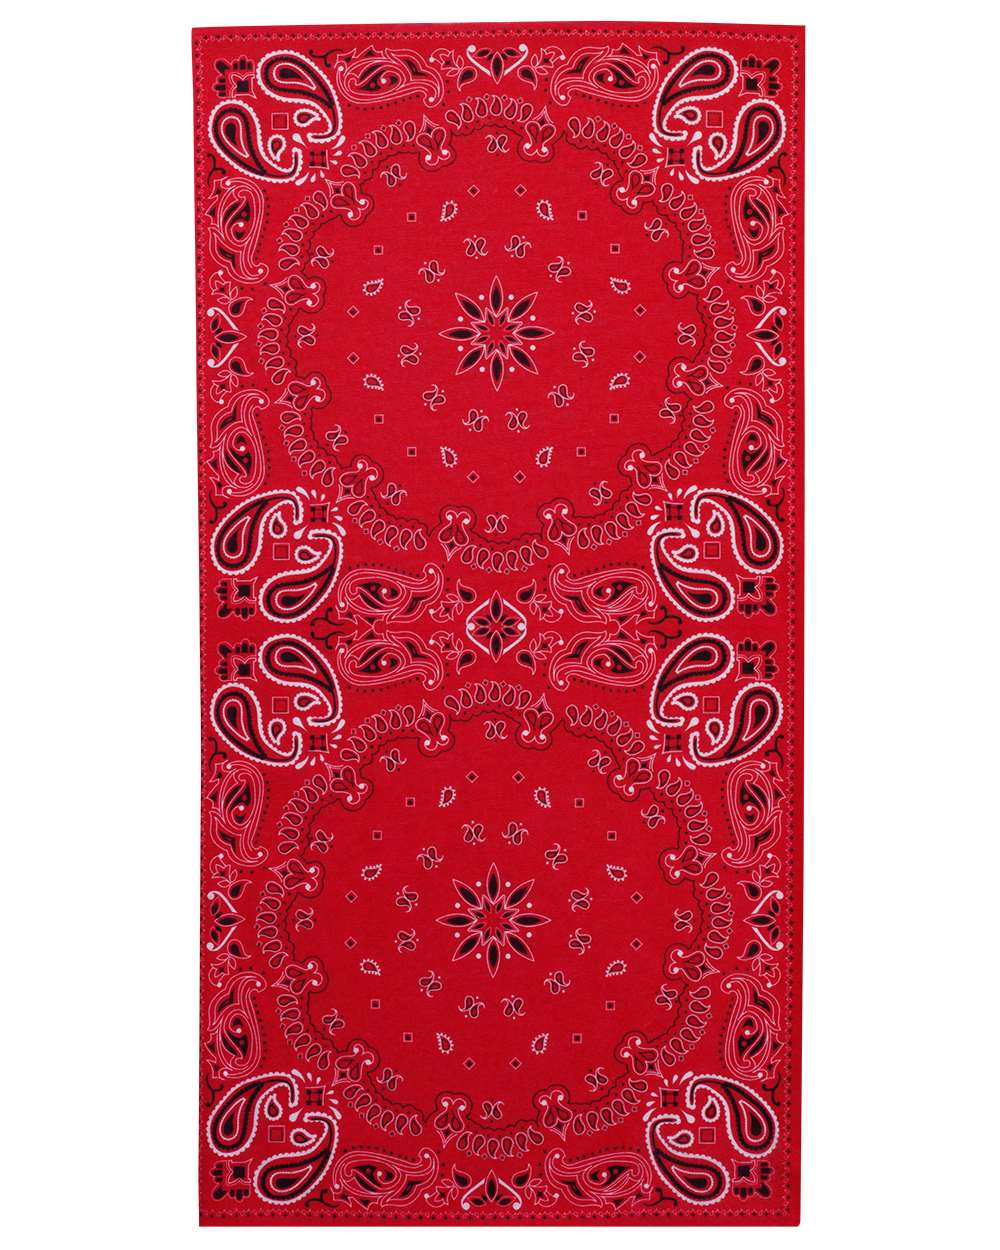 click to view Red Paisley